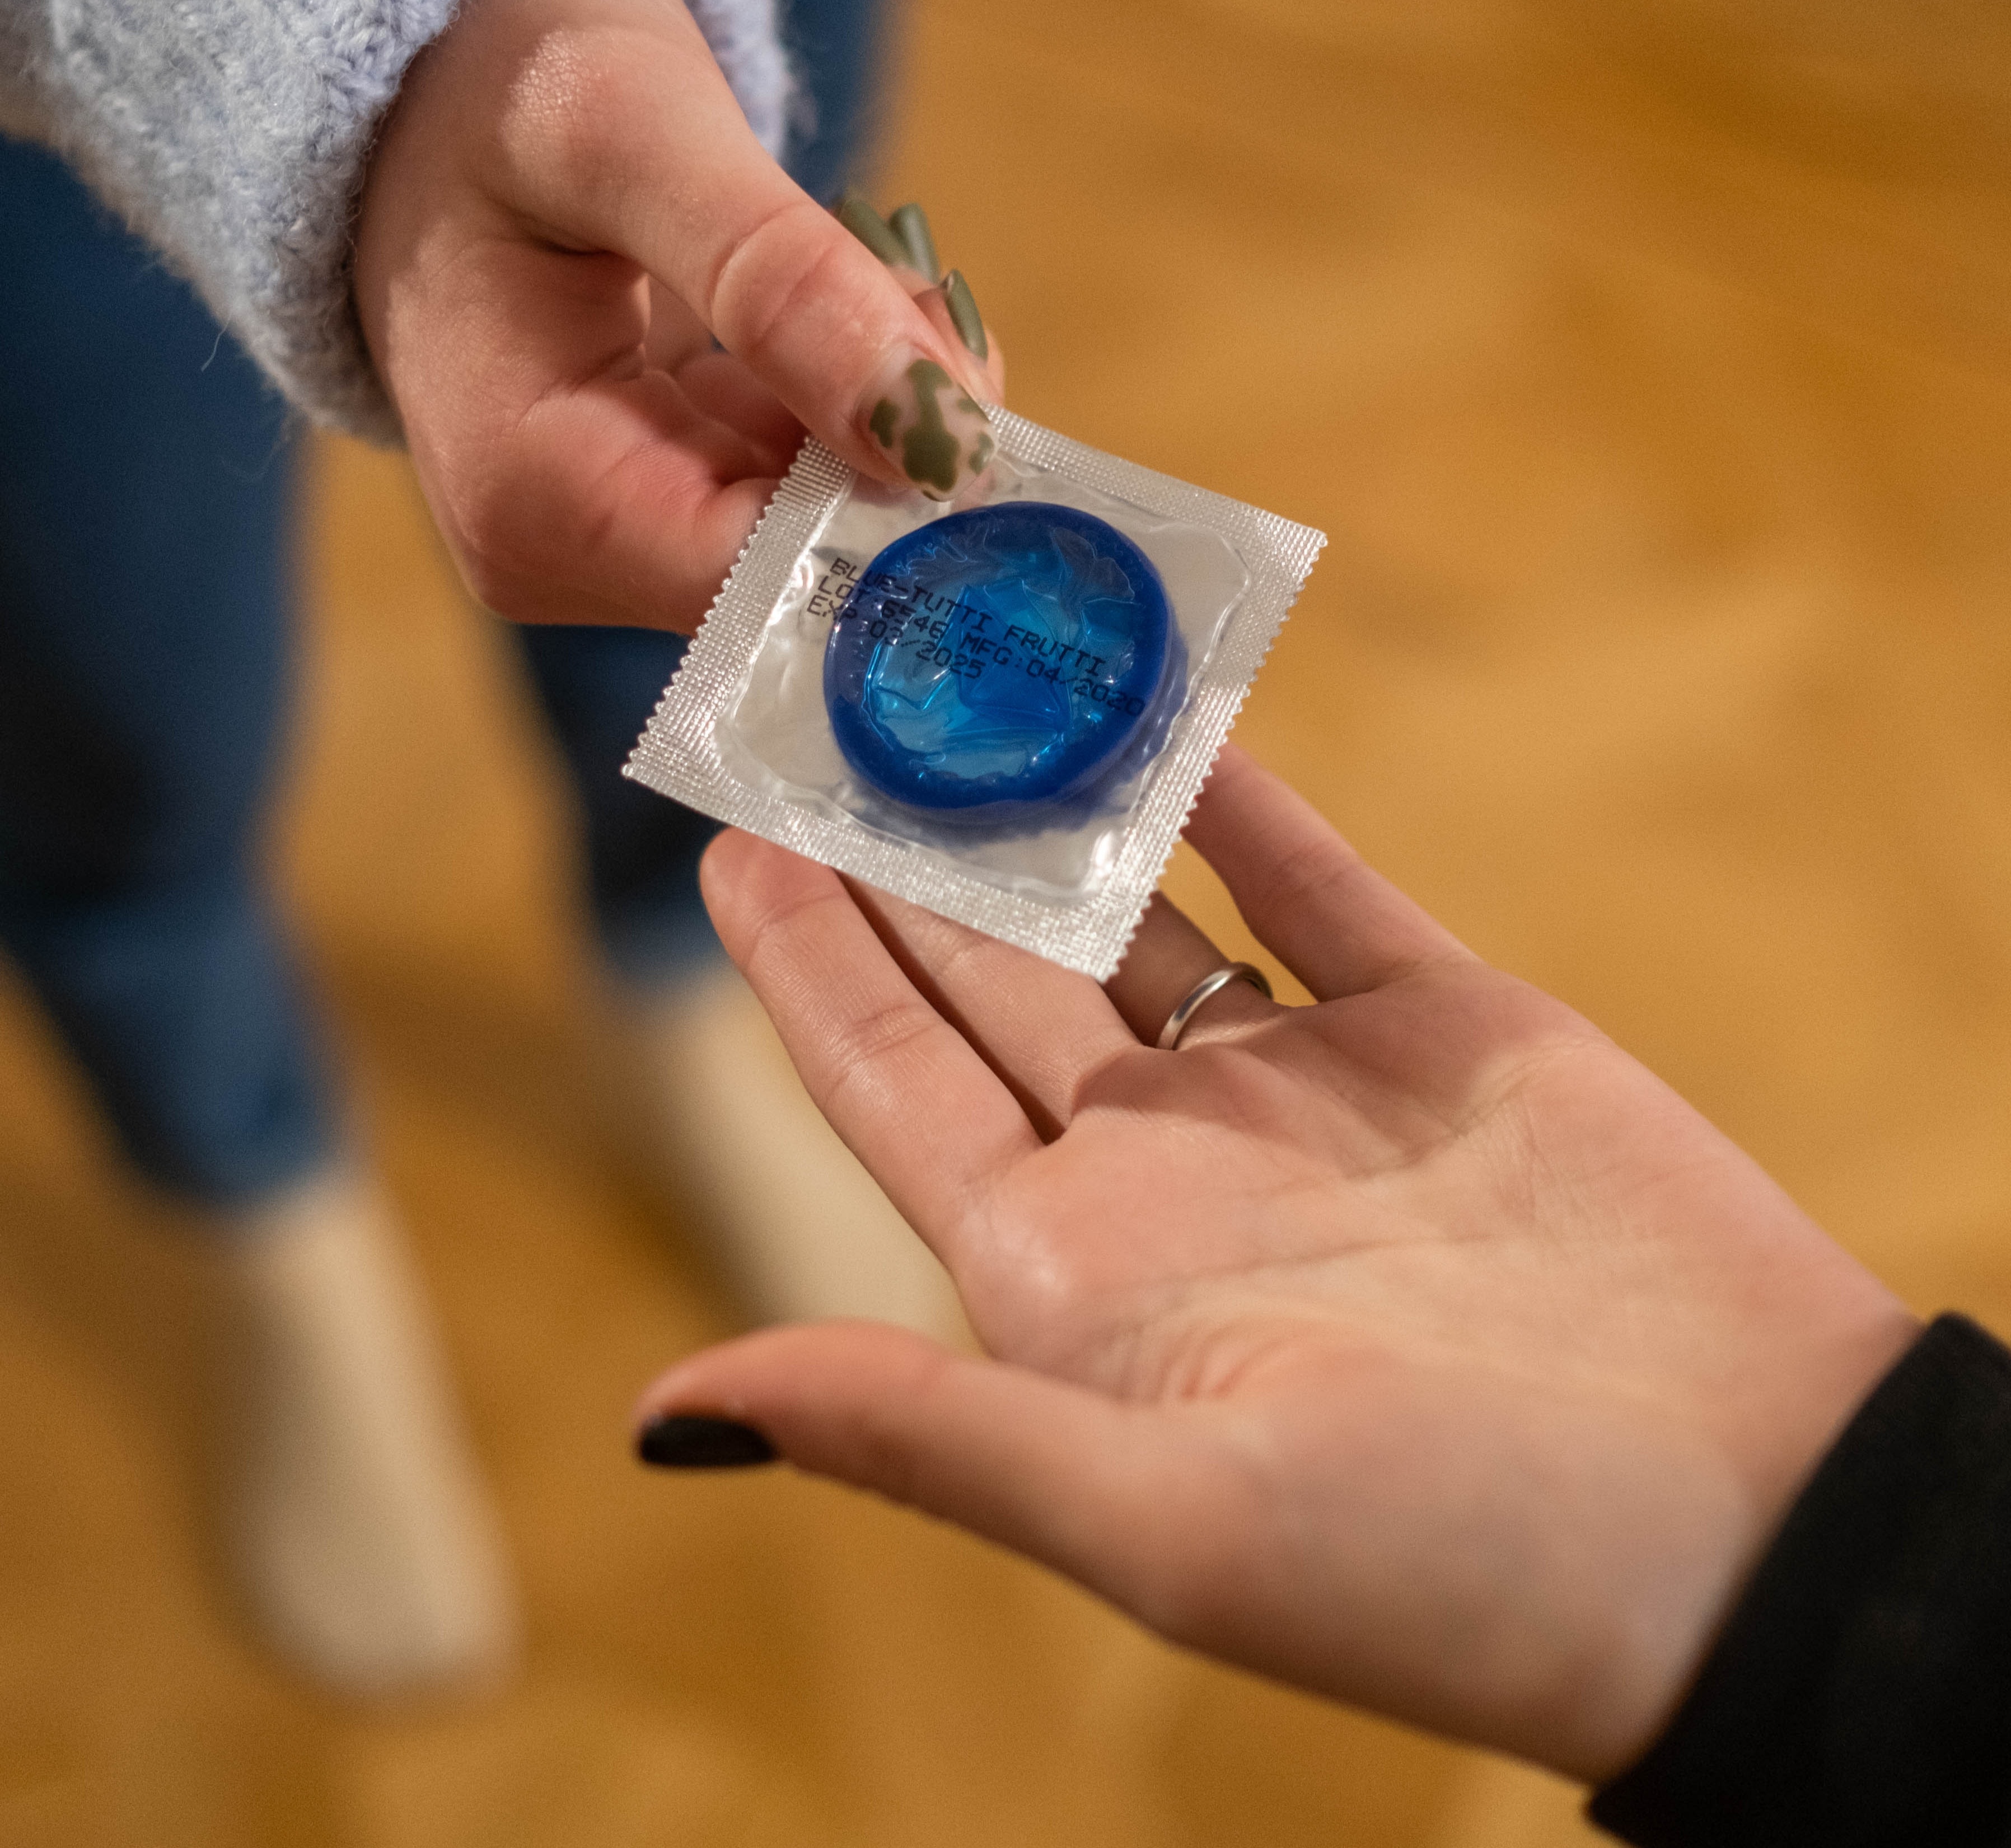 FRANCE OFFERS FREE CONDOMS TO YOUNG PEOPLE TO PREVENT UNWANTED PREGNANCIES AND STDS